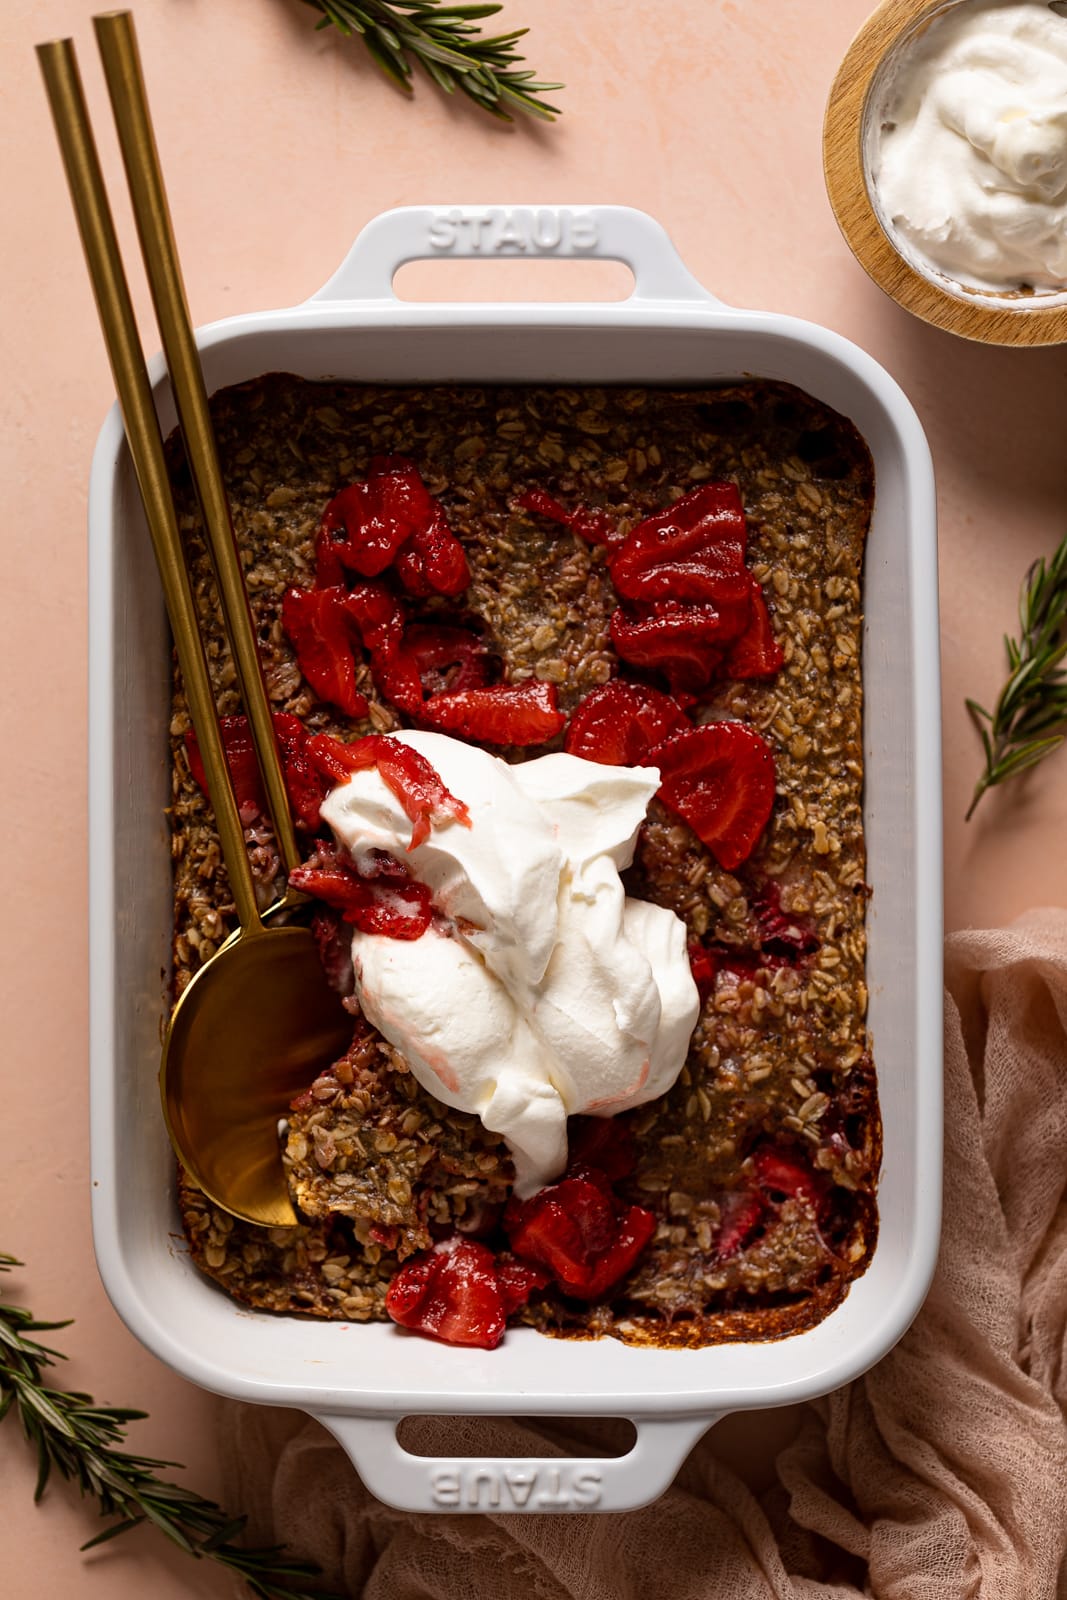 Pan of Strawberry Shortcake Baked Oats topped with strawberry sauce and coconut whipped cream